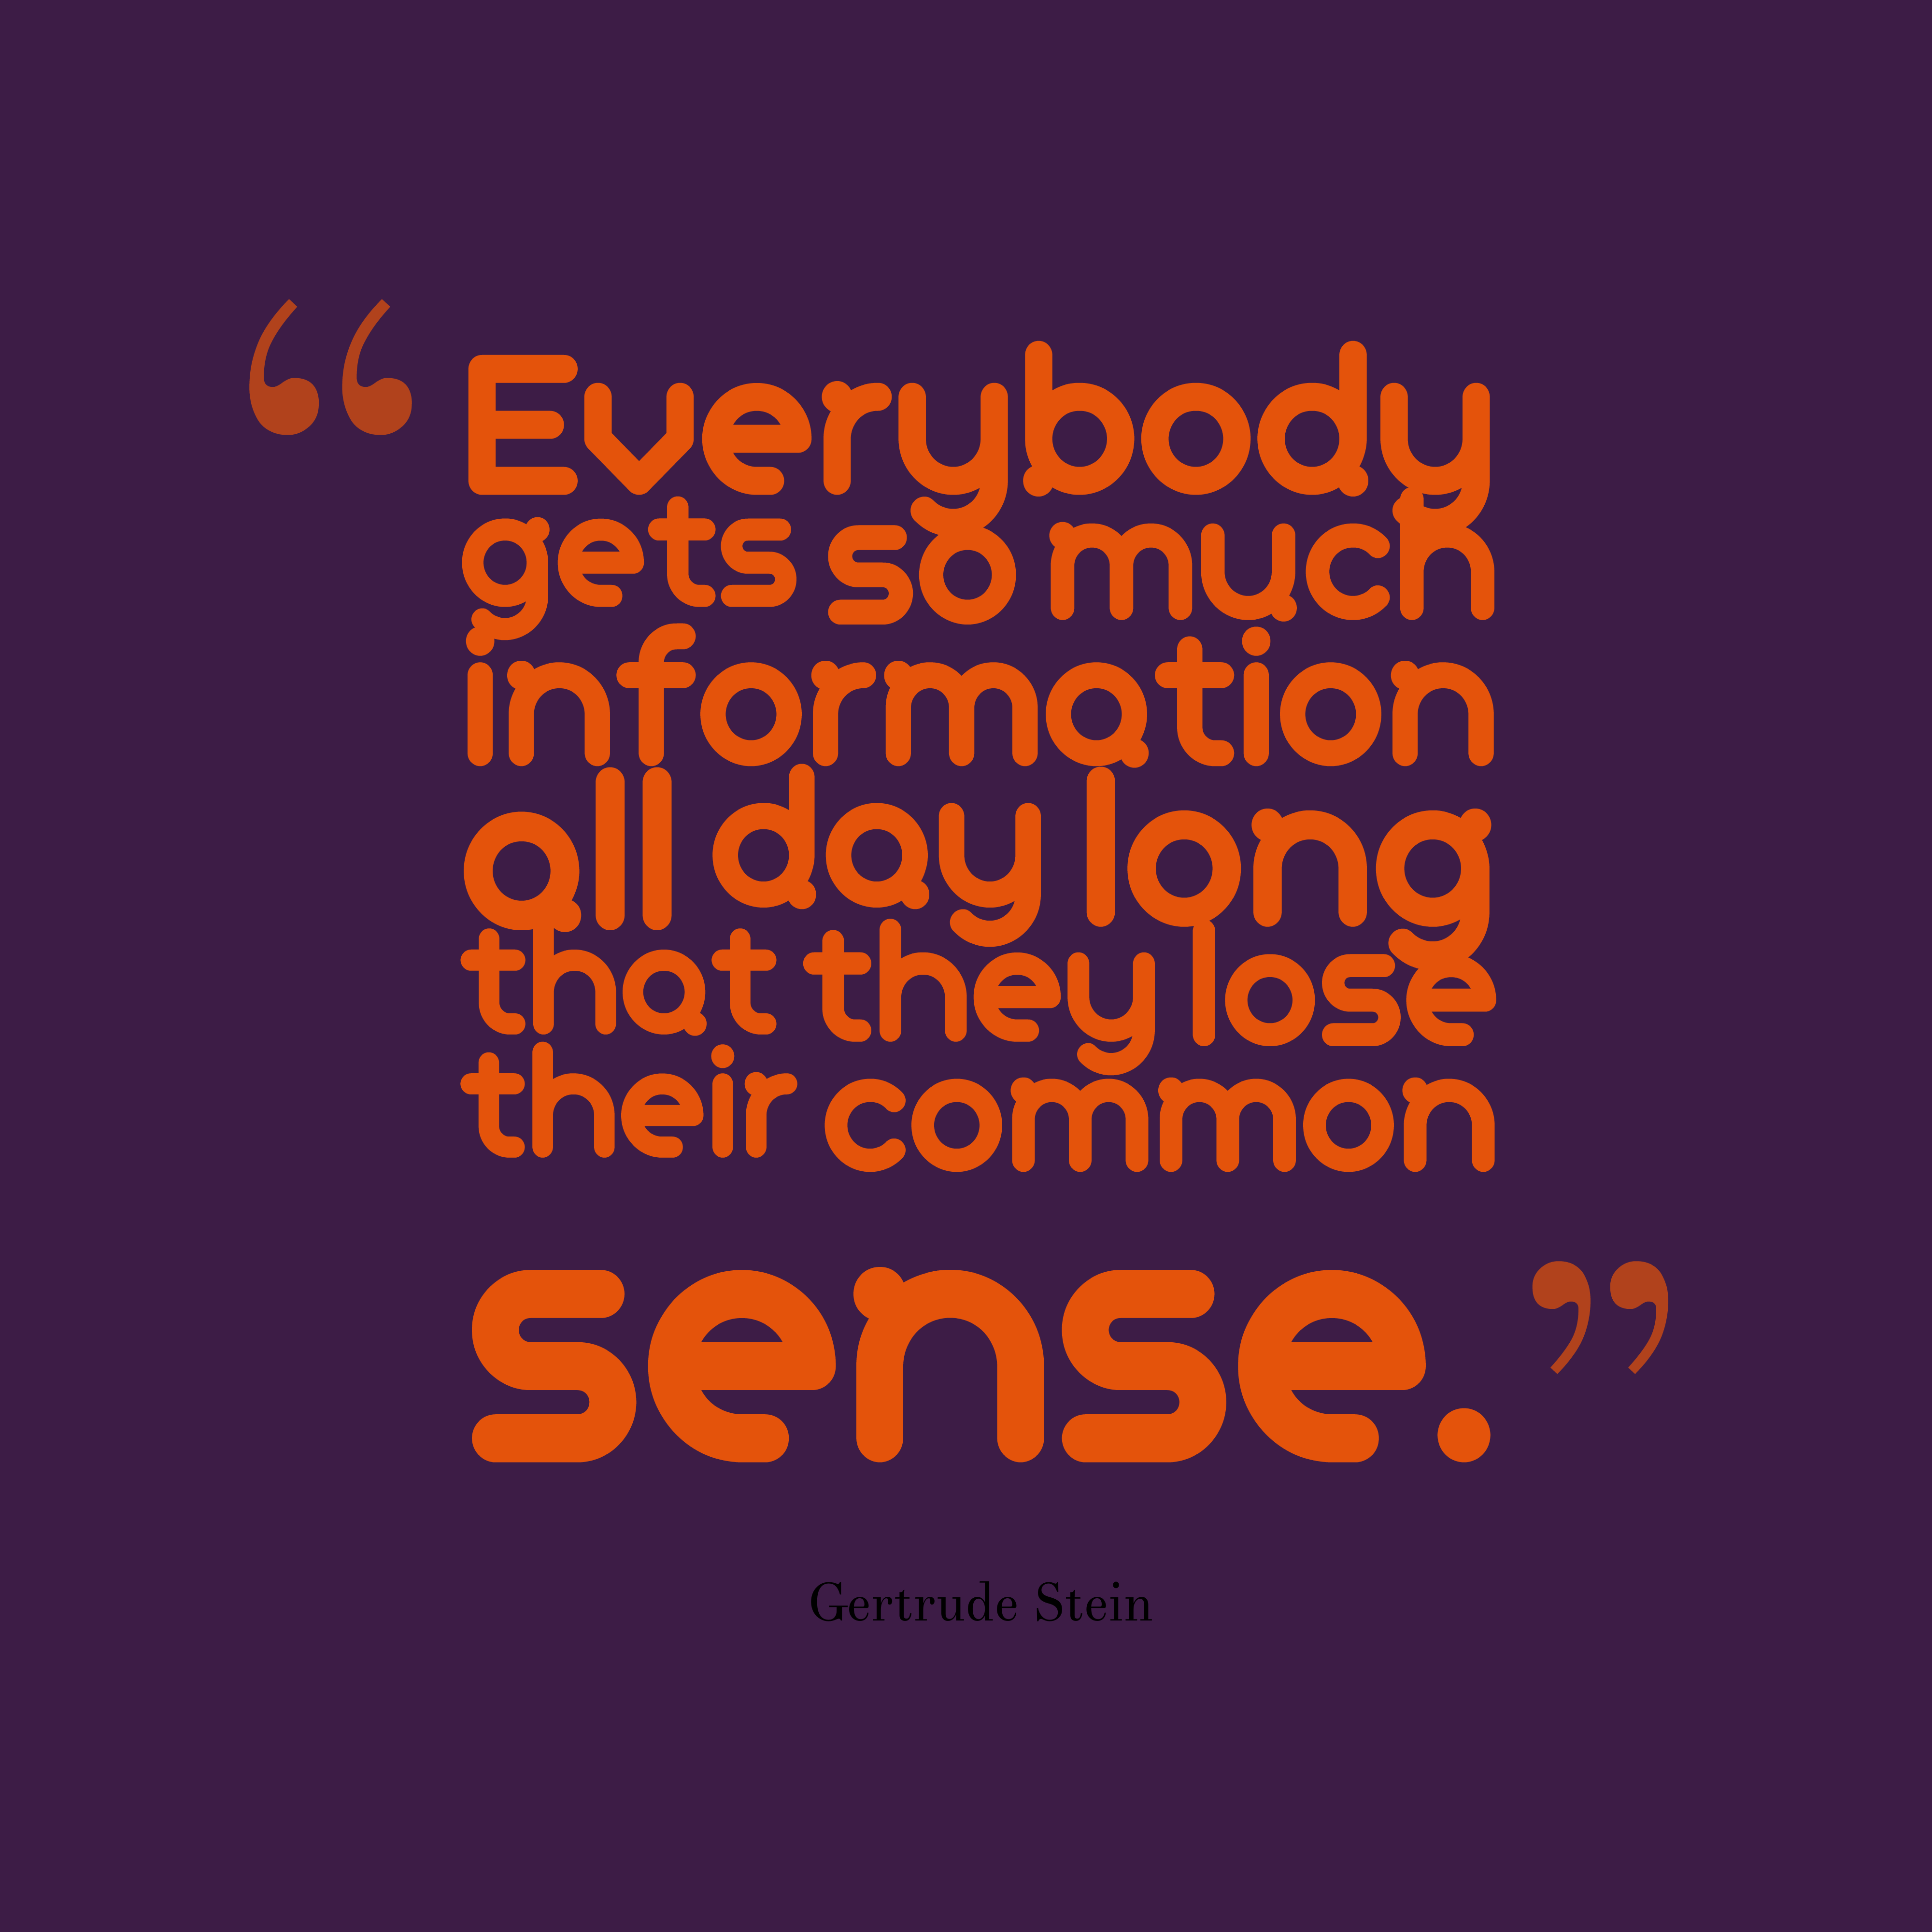 Everybody gets so much information all day long that they lose their common sense. Gertrude Stein